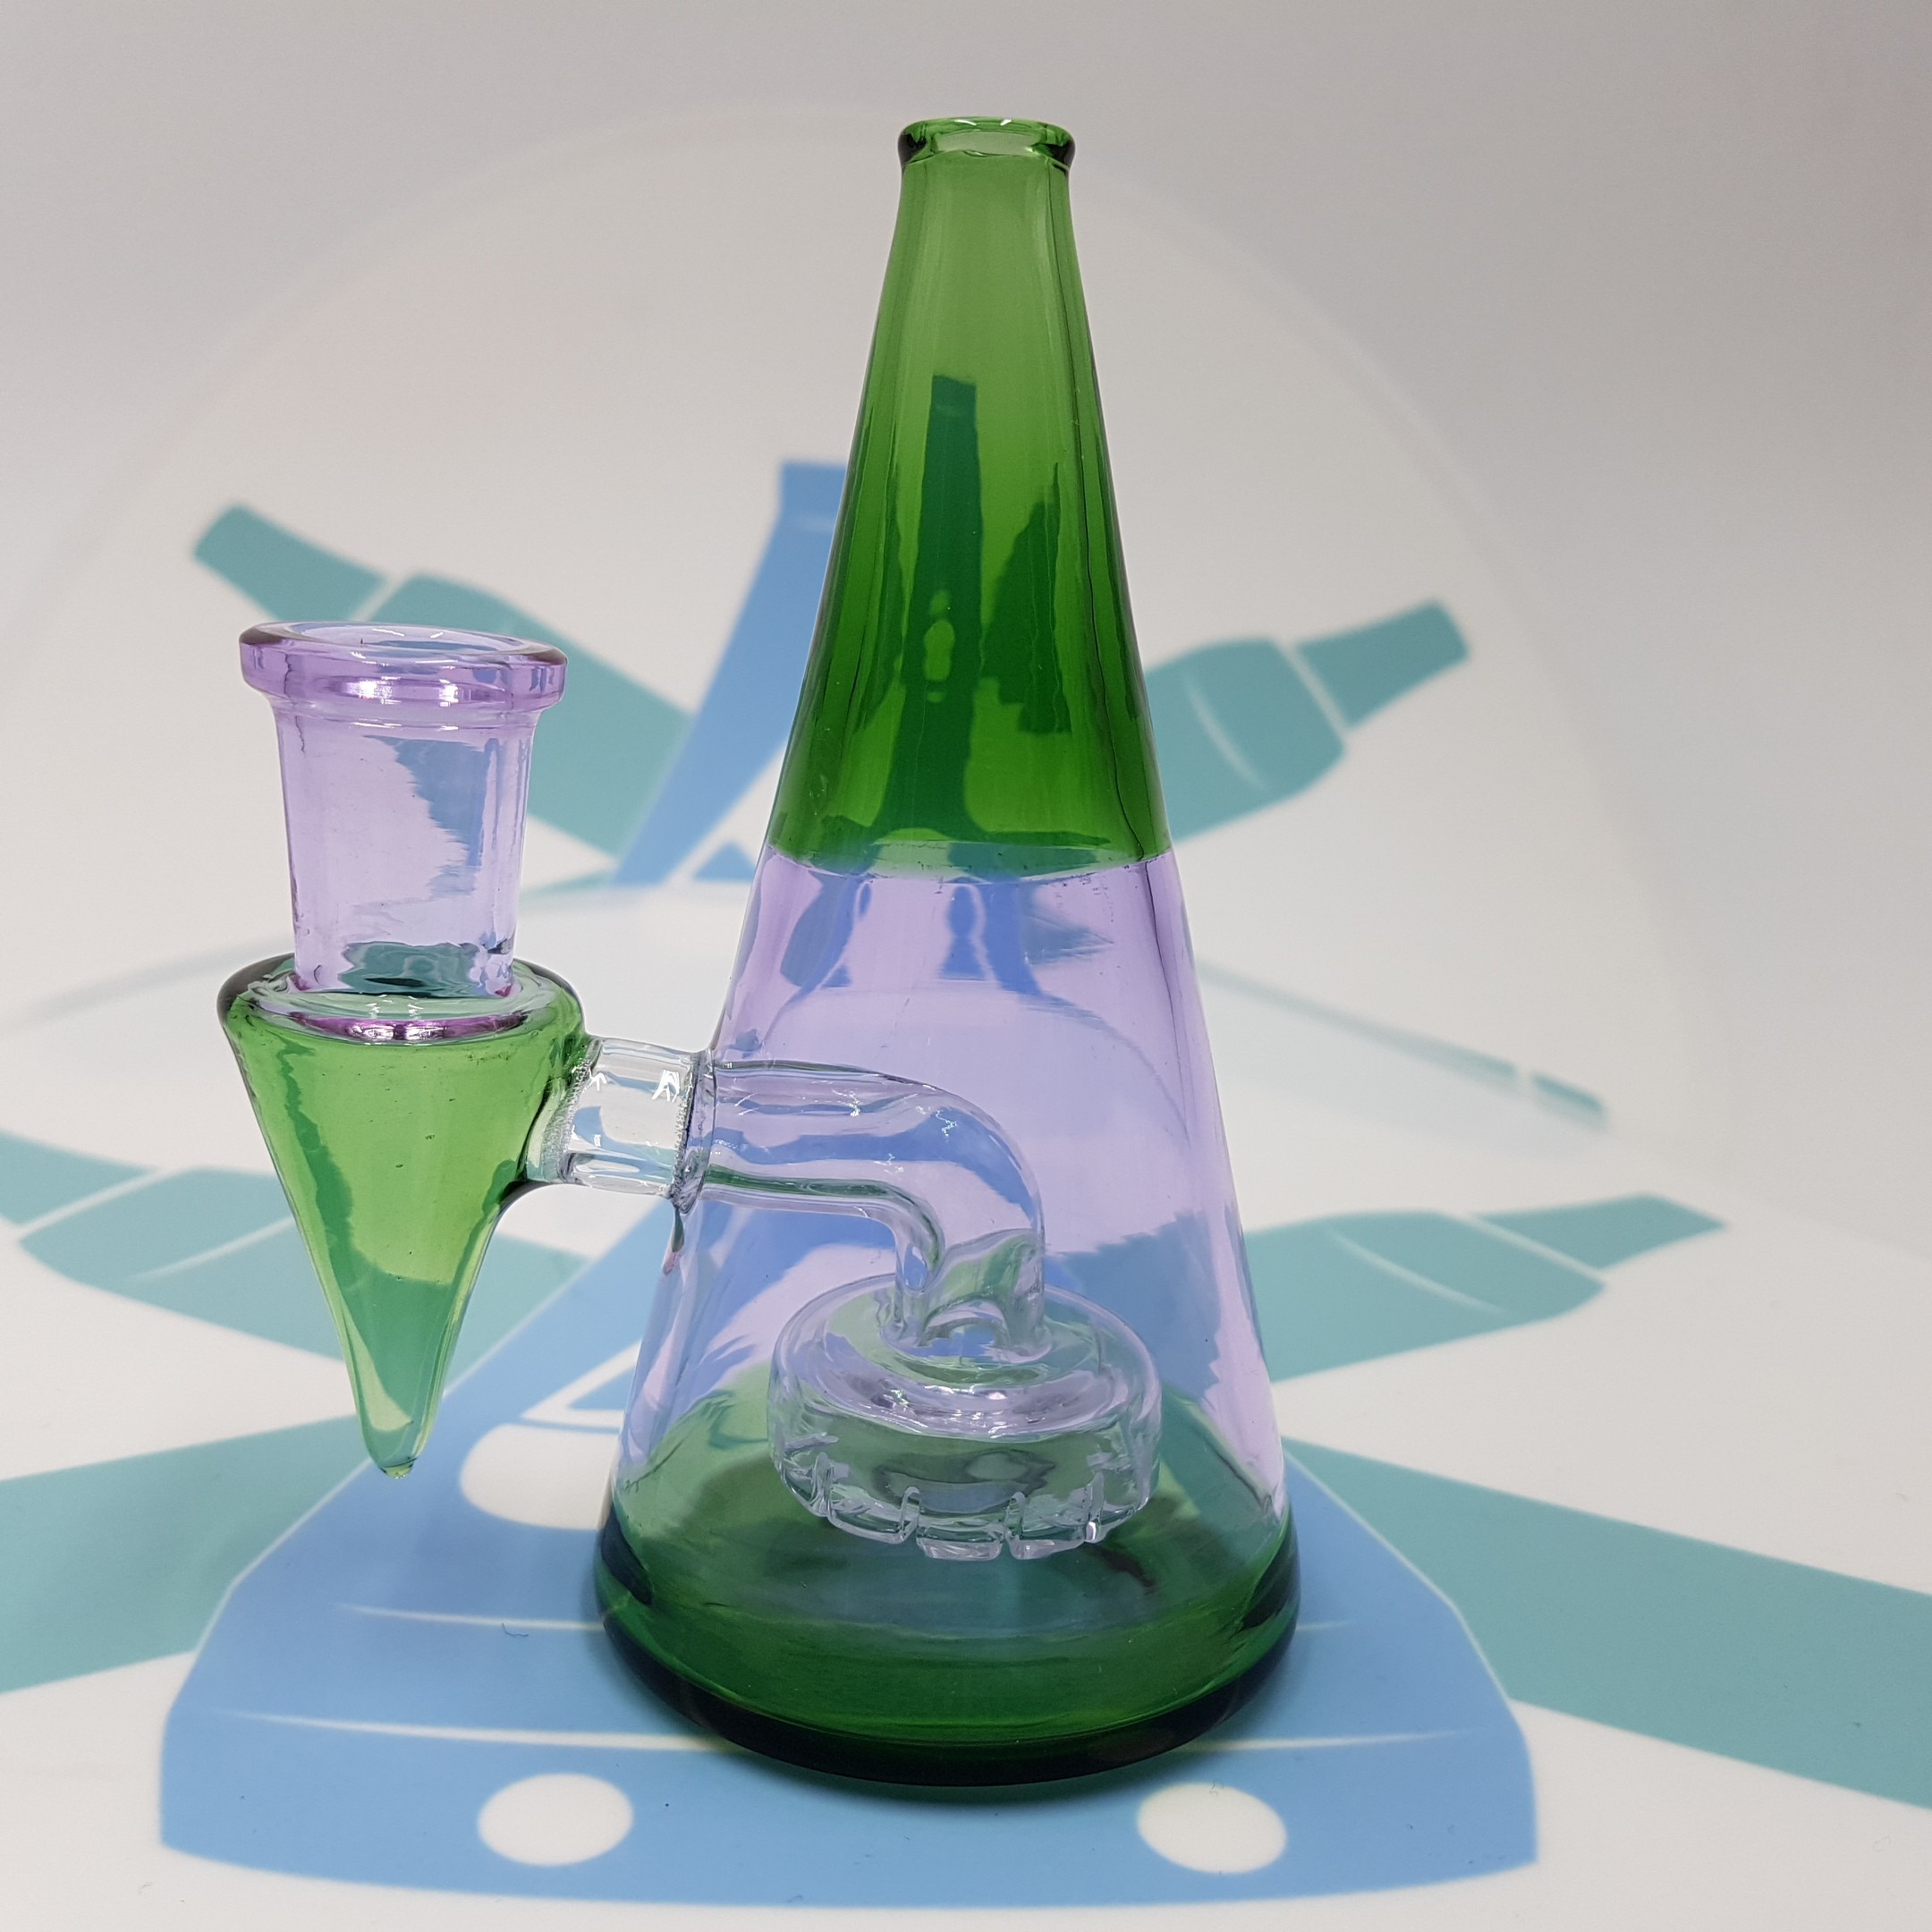 Pourite cone piece and stem kit BUY ONLINE NOW At